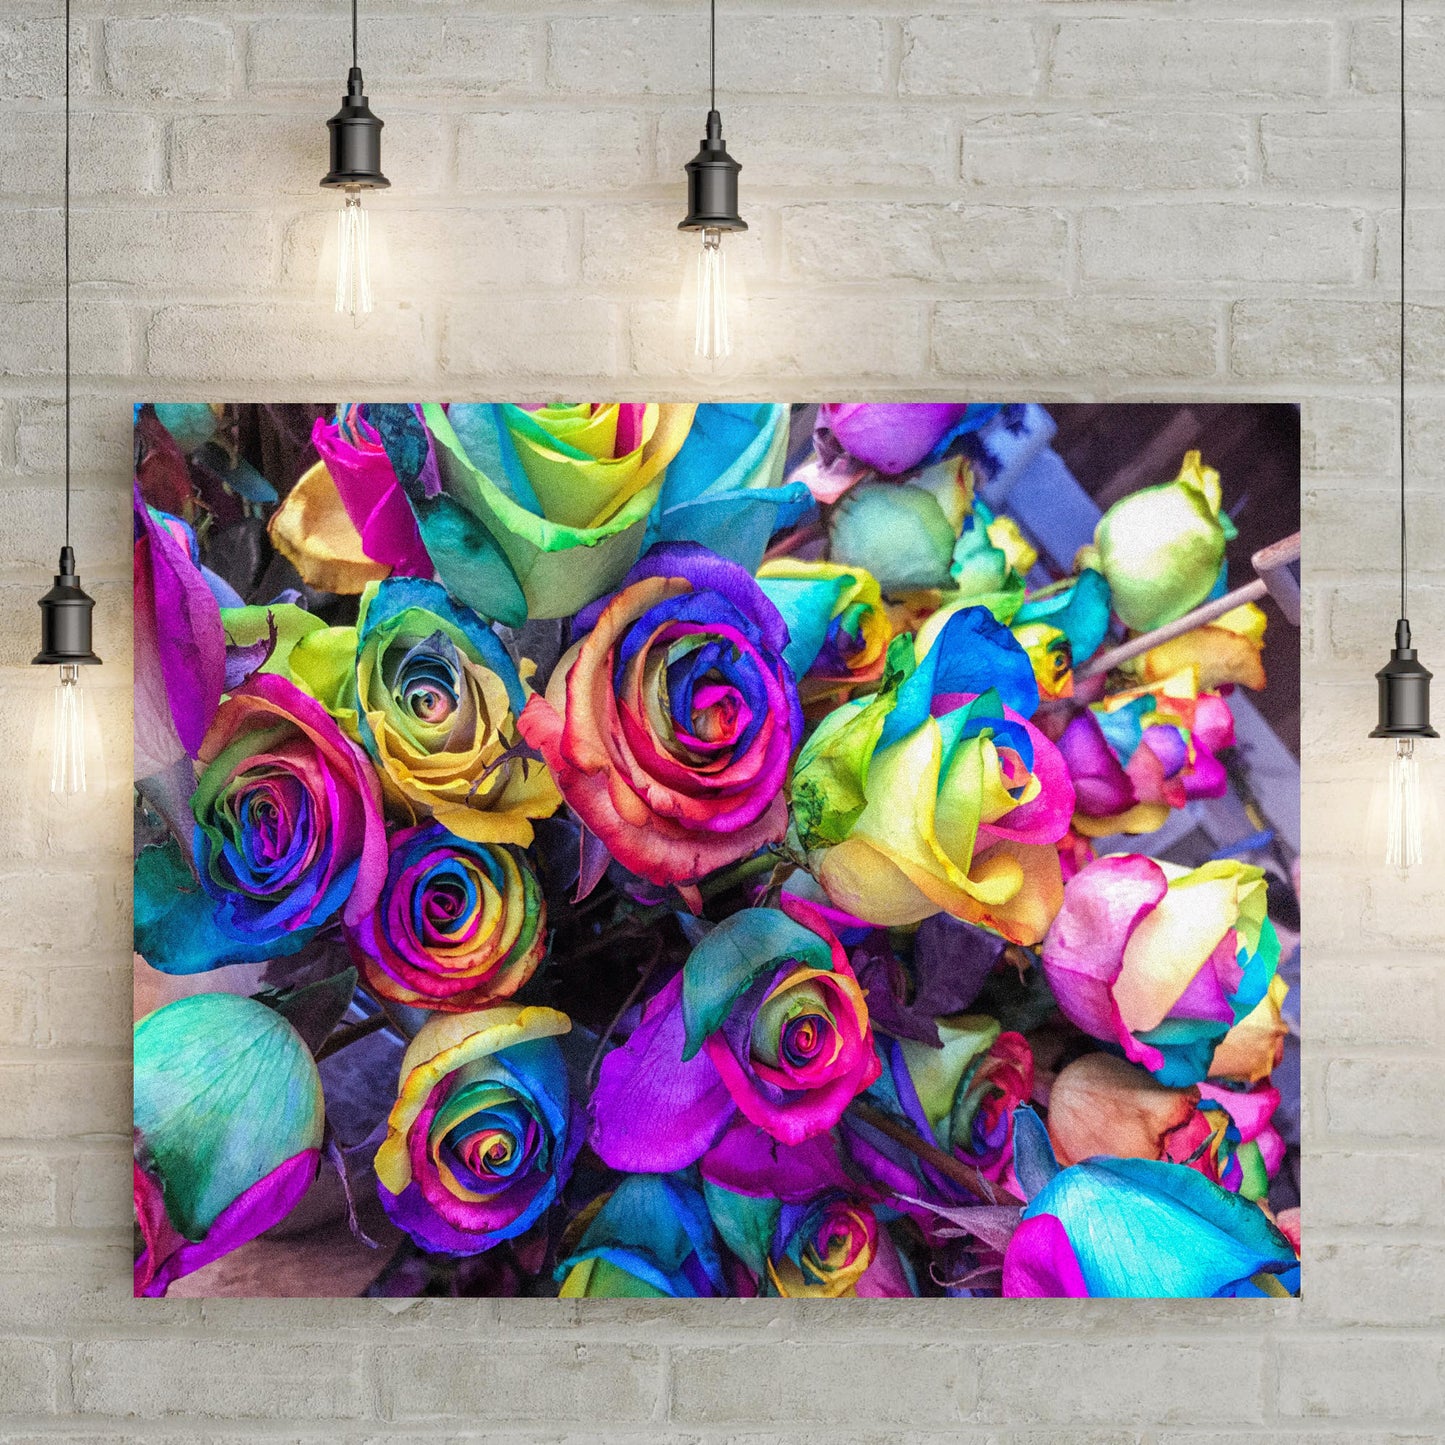 Rainbow Roses Canvas Wall Art - Image by Tailored Canvases